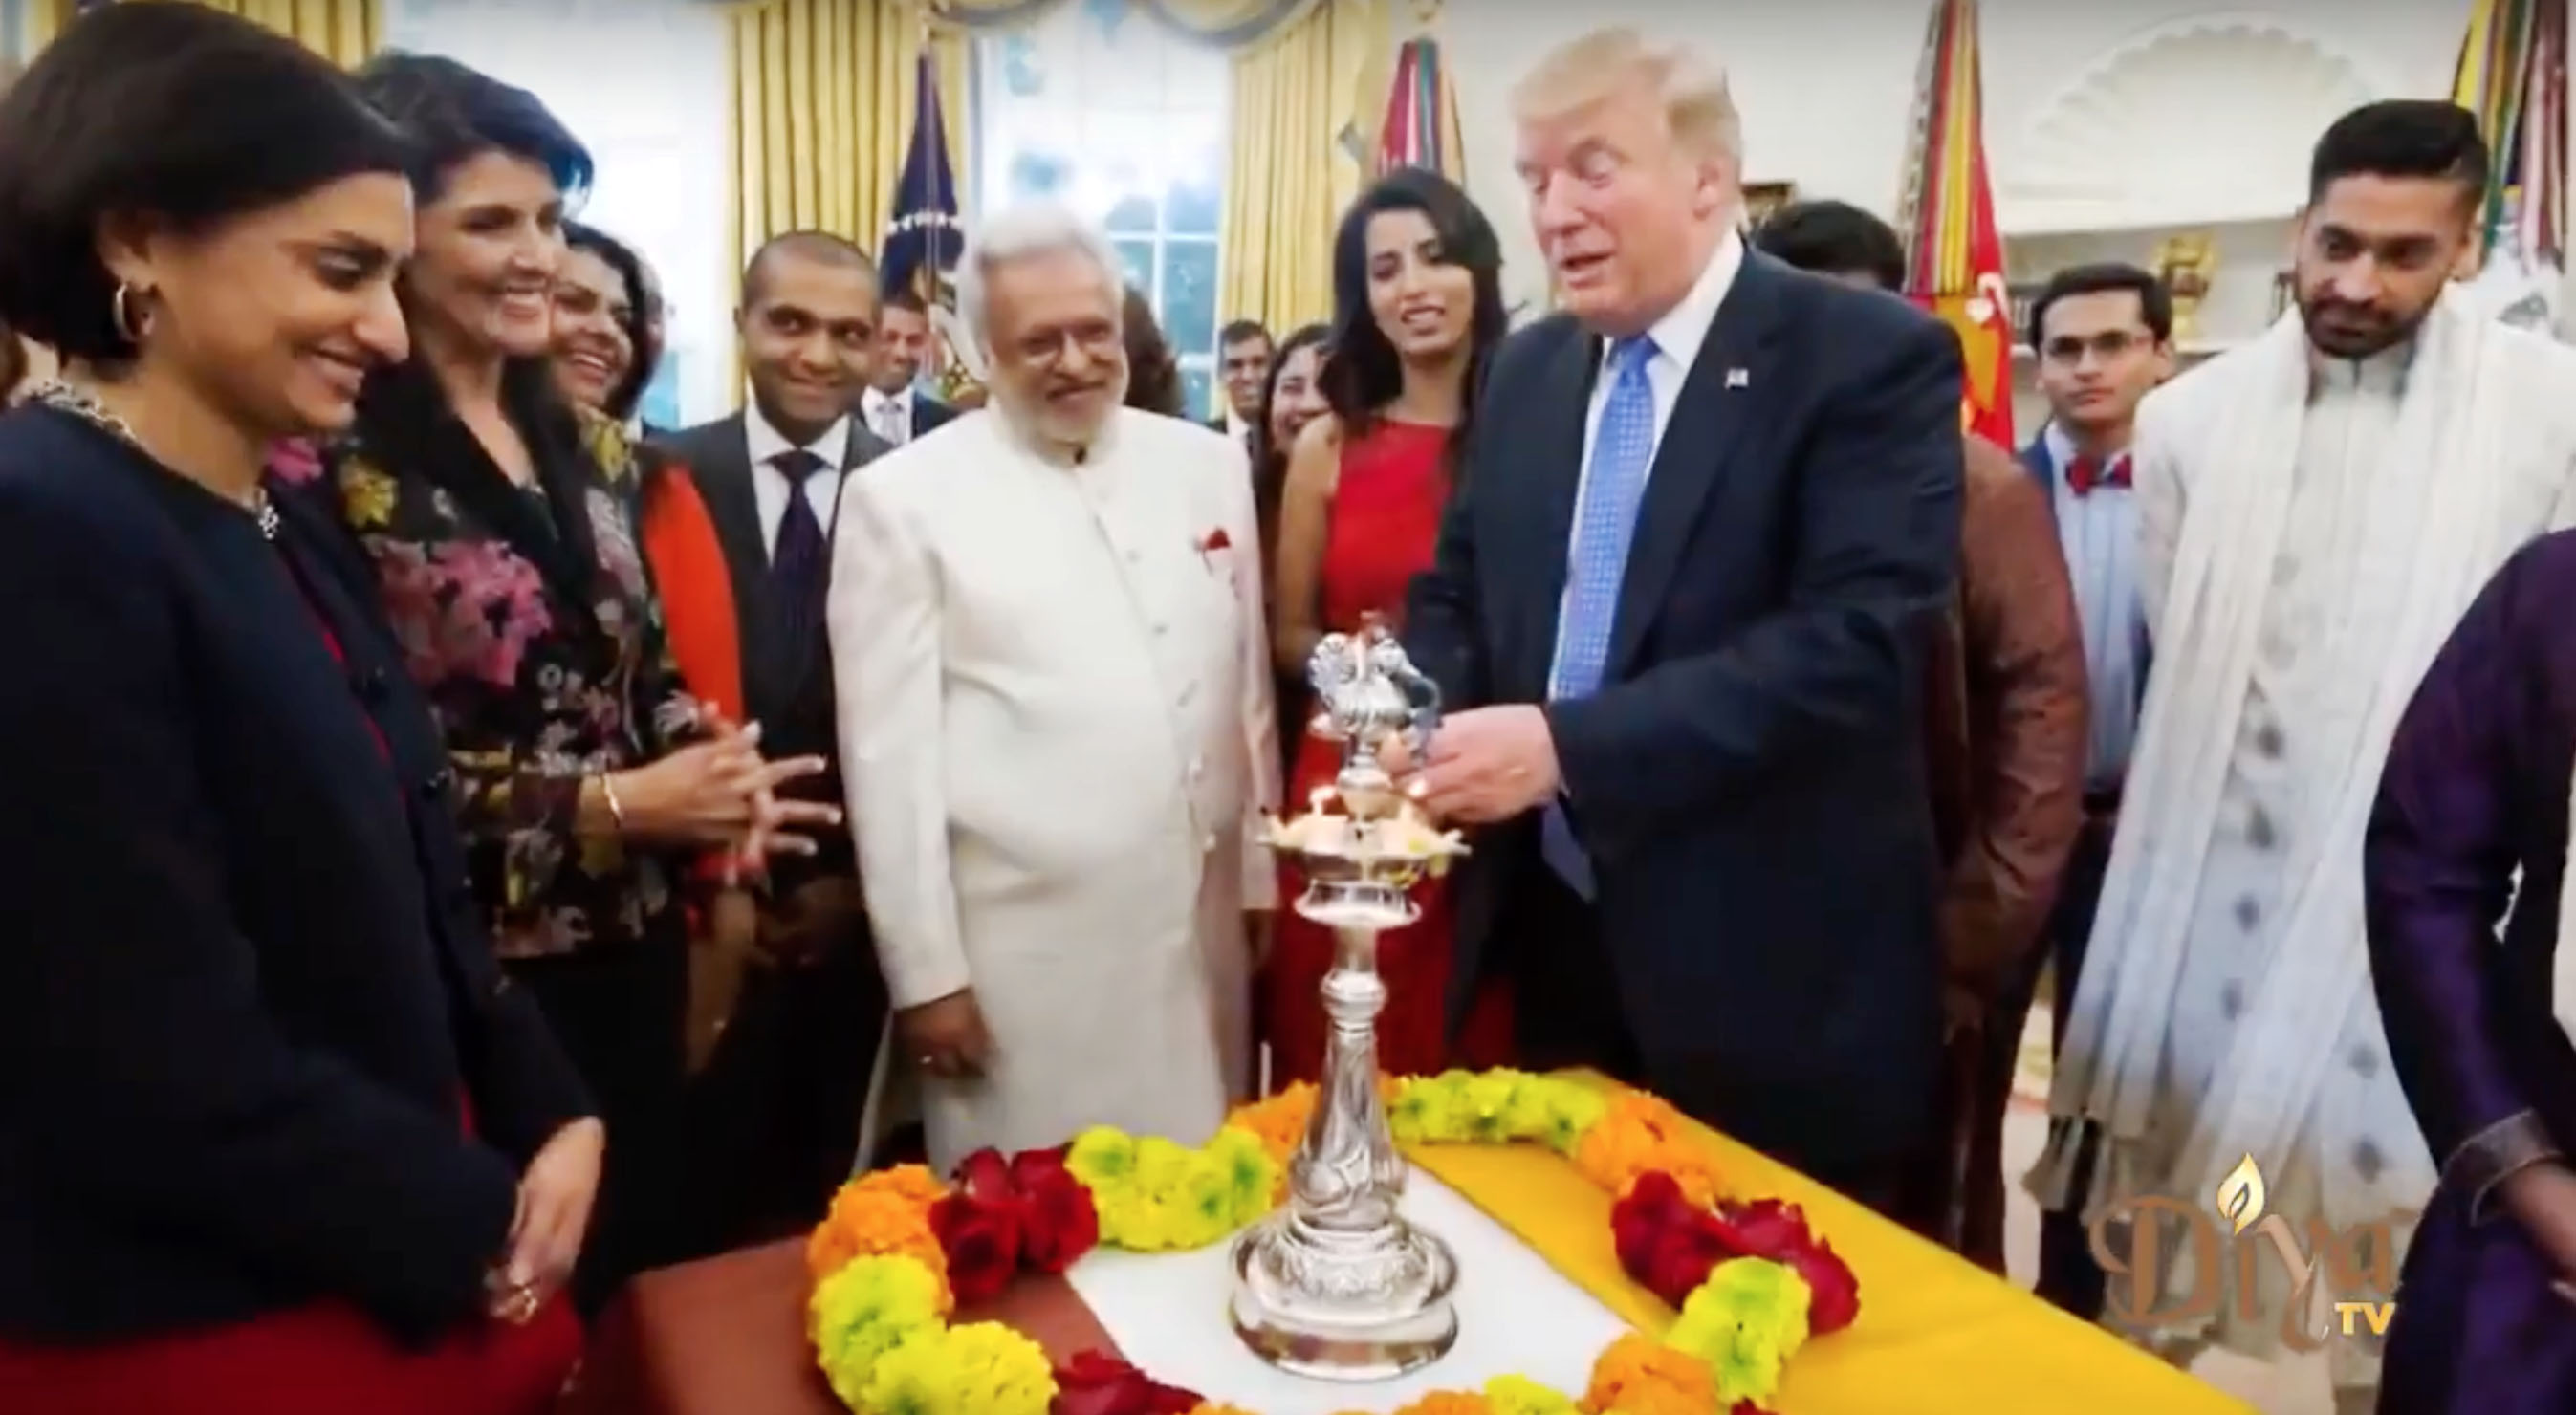 On the eve of Diwali, Indian Americans - Hindus, Sikhs, Jains,, including staff members of the Trump Cabinet gathered to light the ceremonial Diya to symbolize the victory of Light over darkness and good over evil